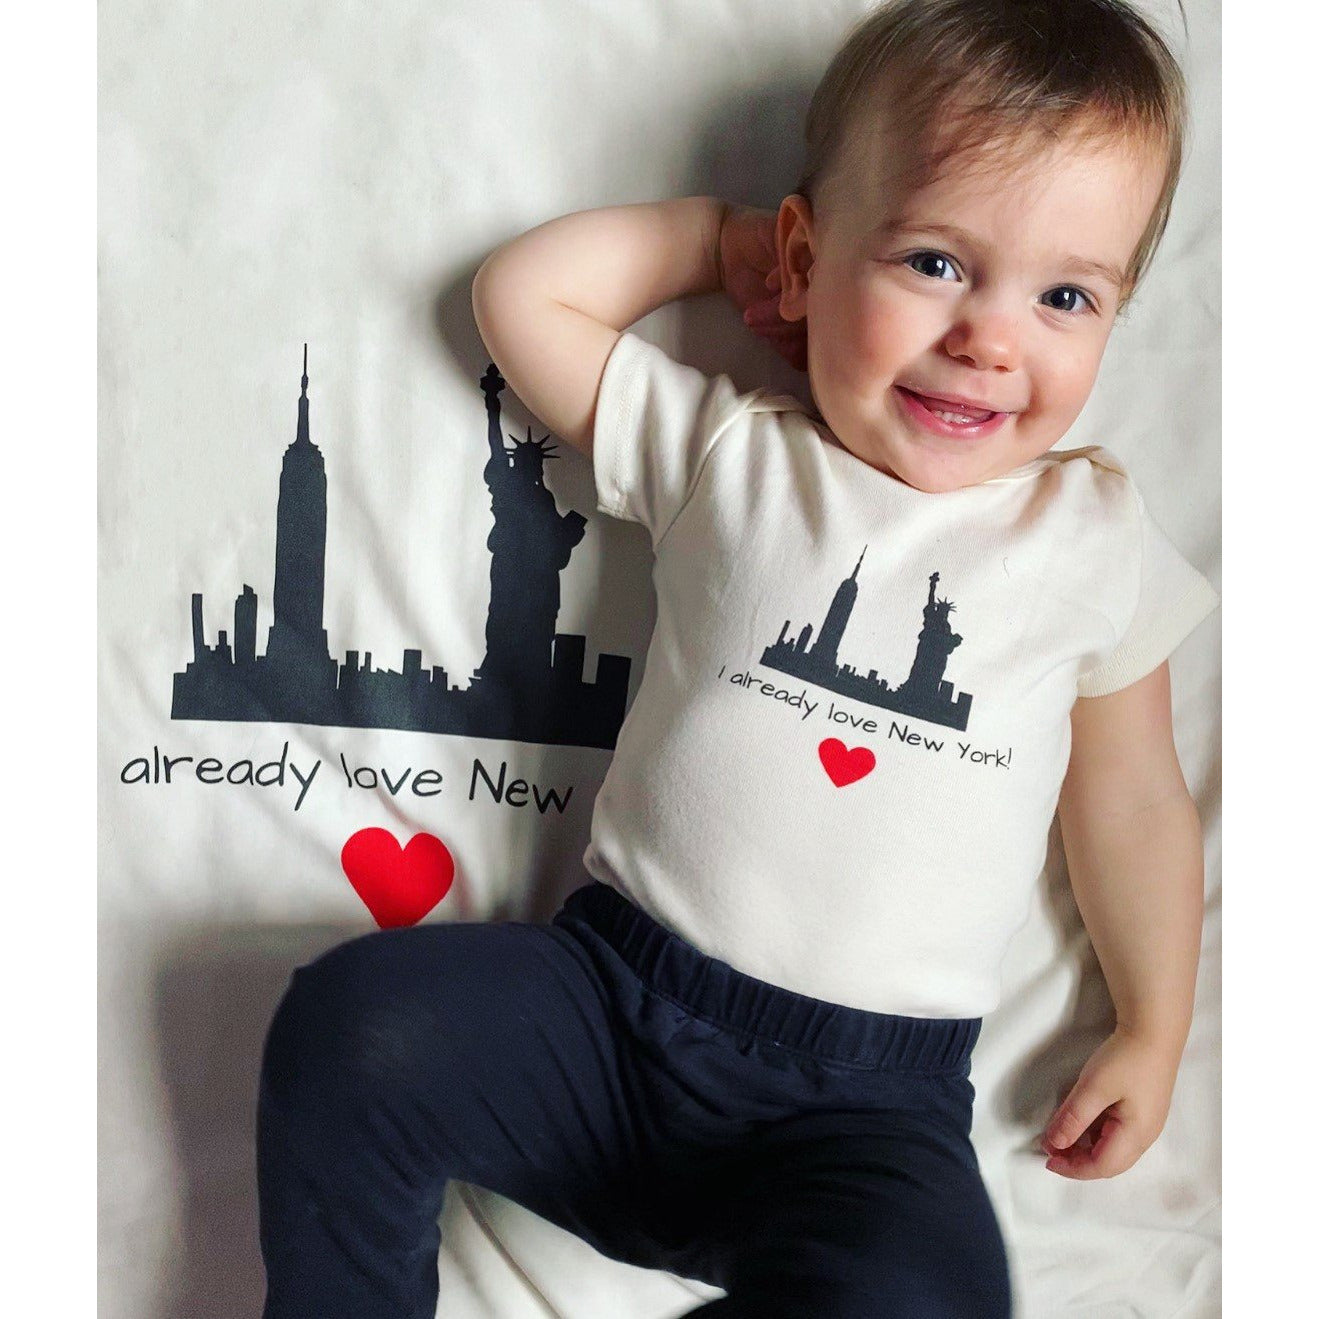 Organic cotton baby onesie - New York PLEASE NOTE. This design is also available in kid t-shirts: 2T, 4T, 6T - Simply Chickie